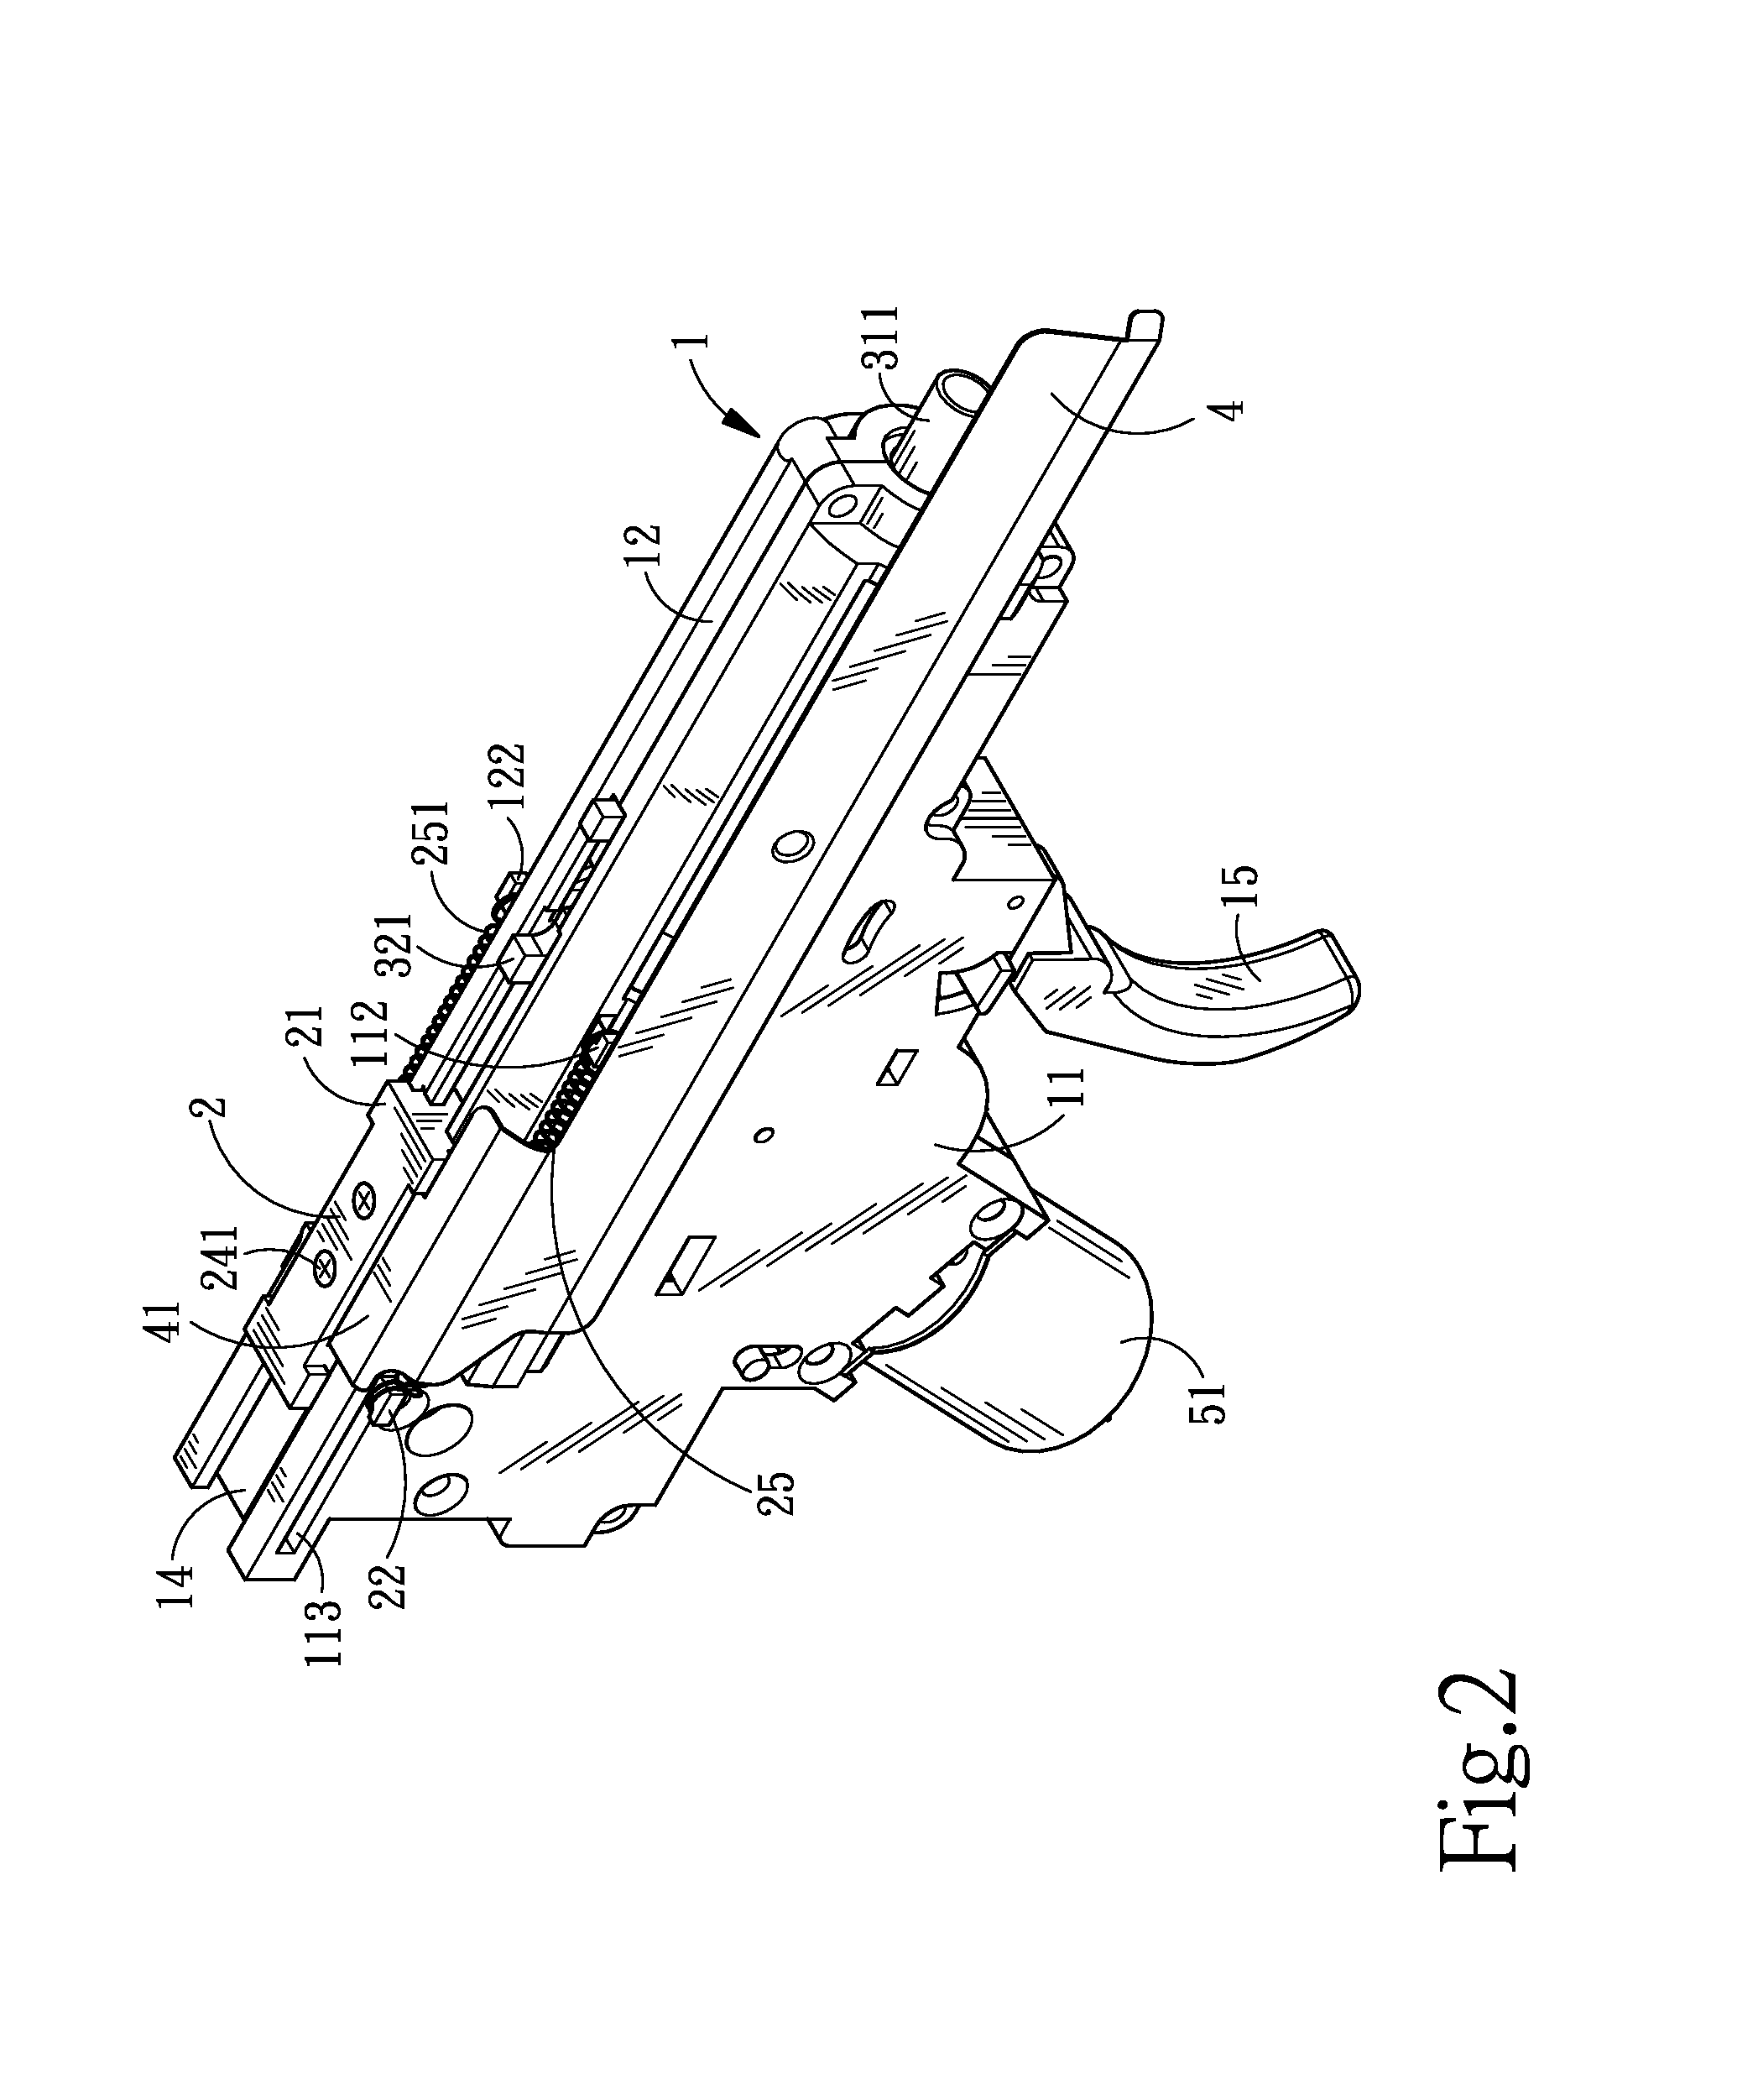 Simulated shell-throwing action of toy gun mechanism